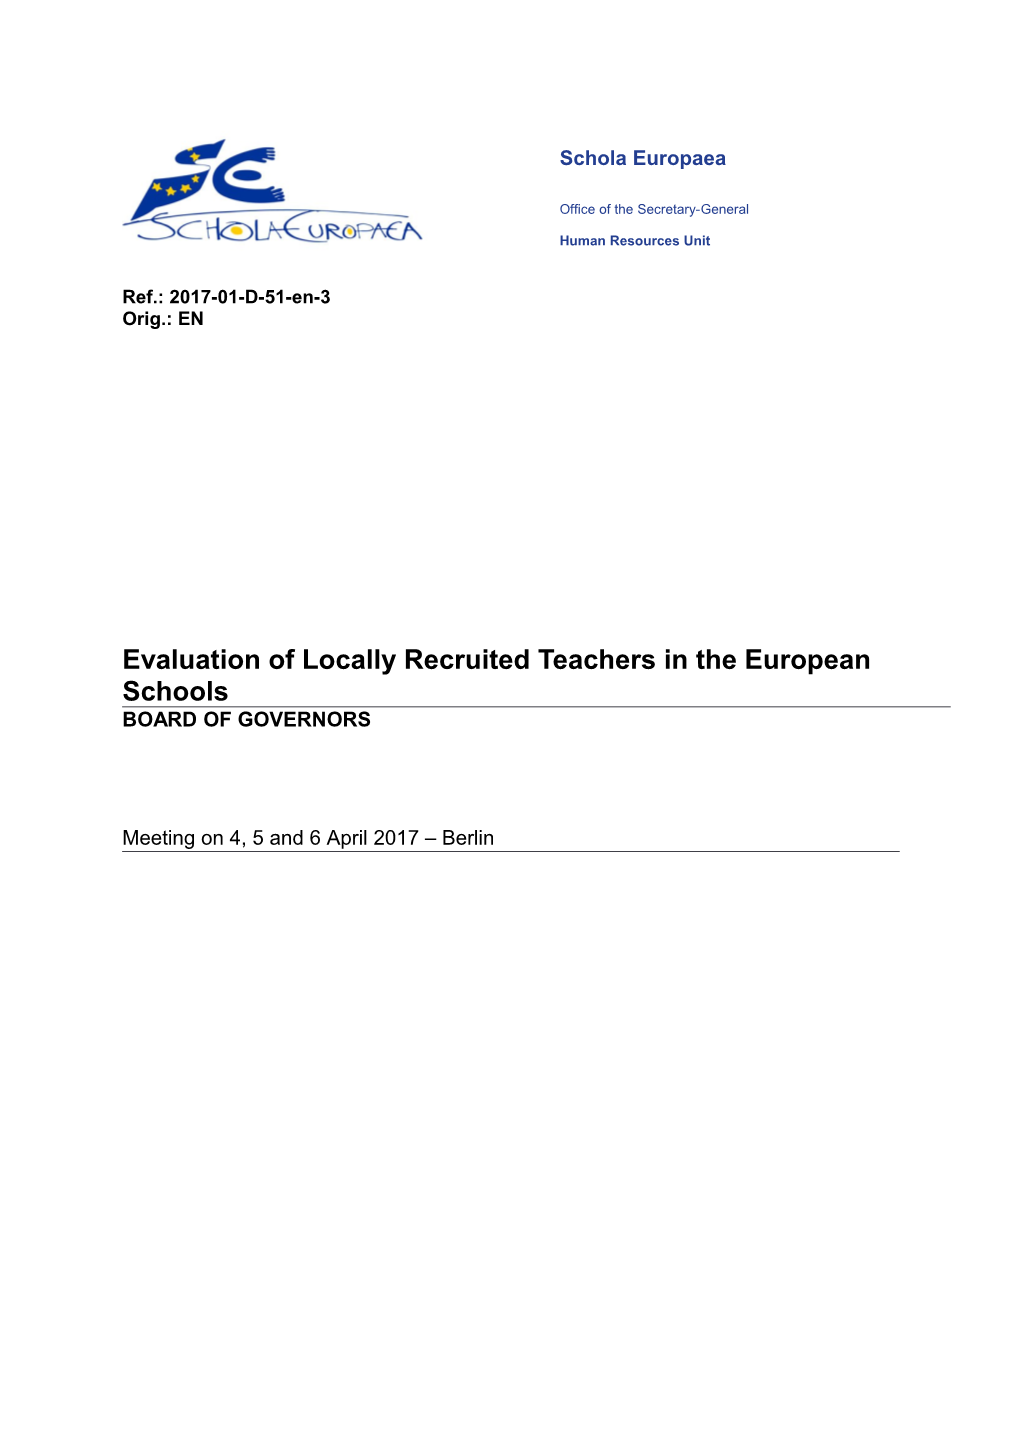 Evaluation of Locally Recruited Teachers in the European Schools